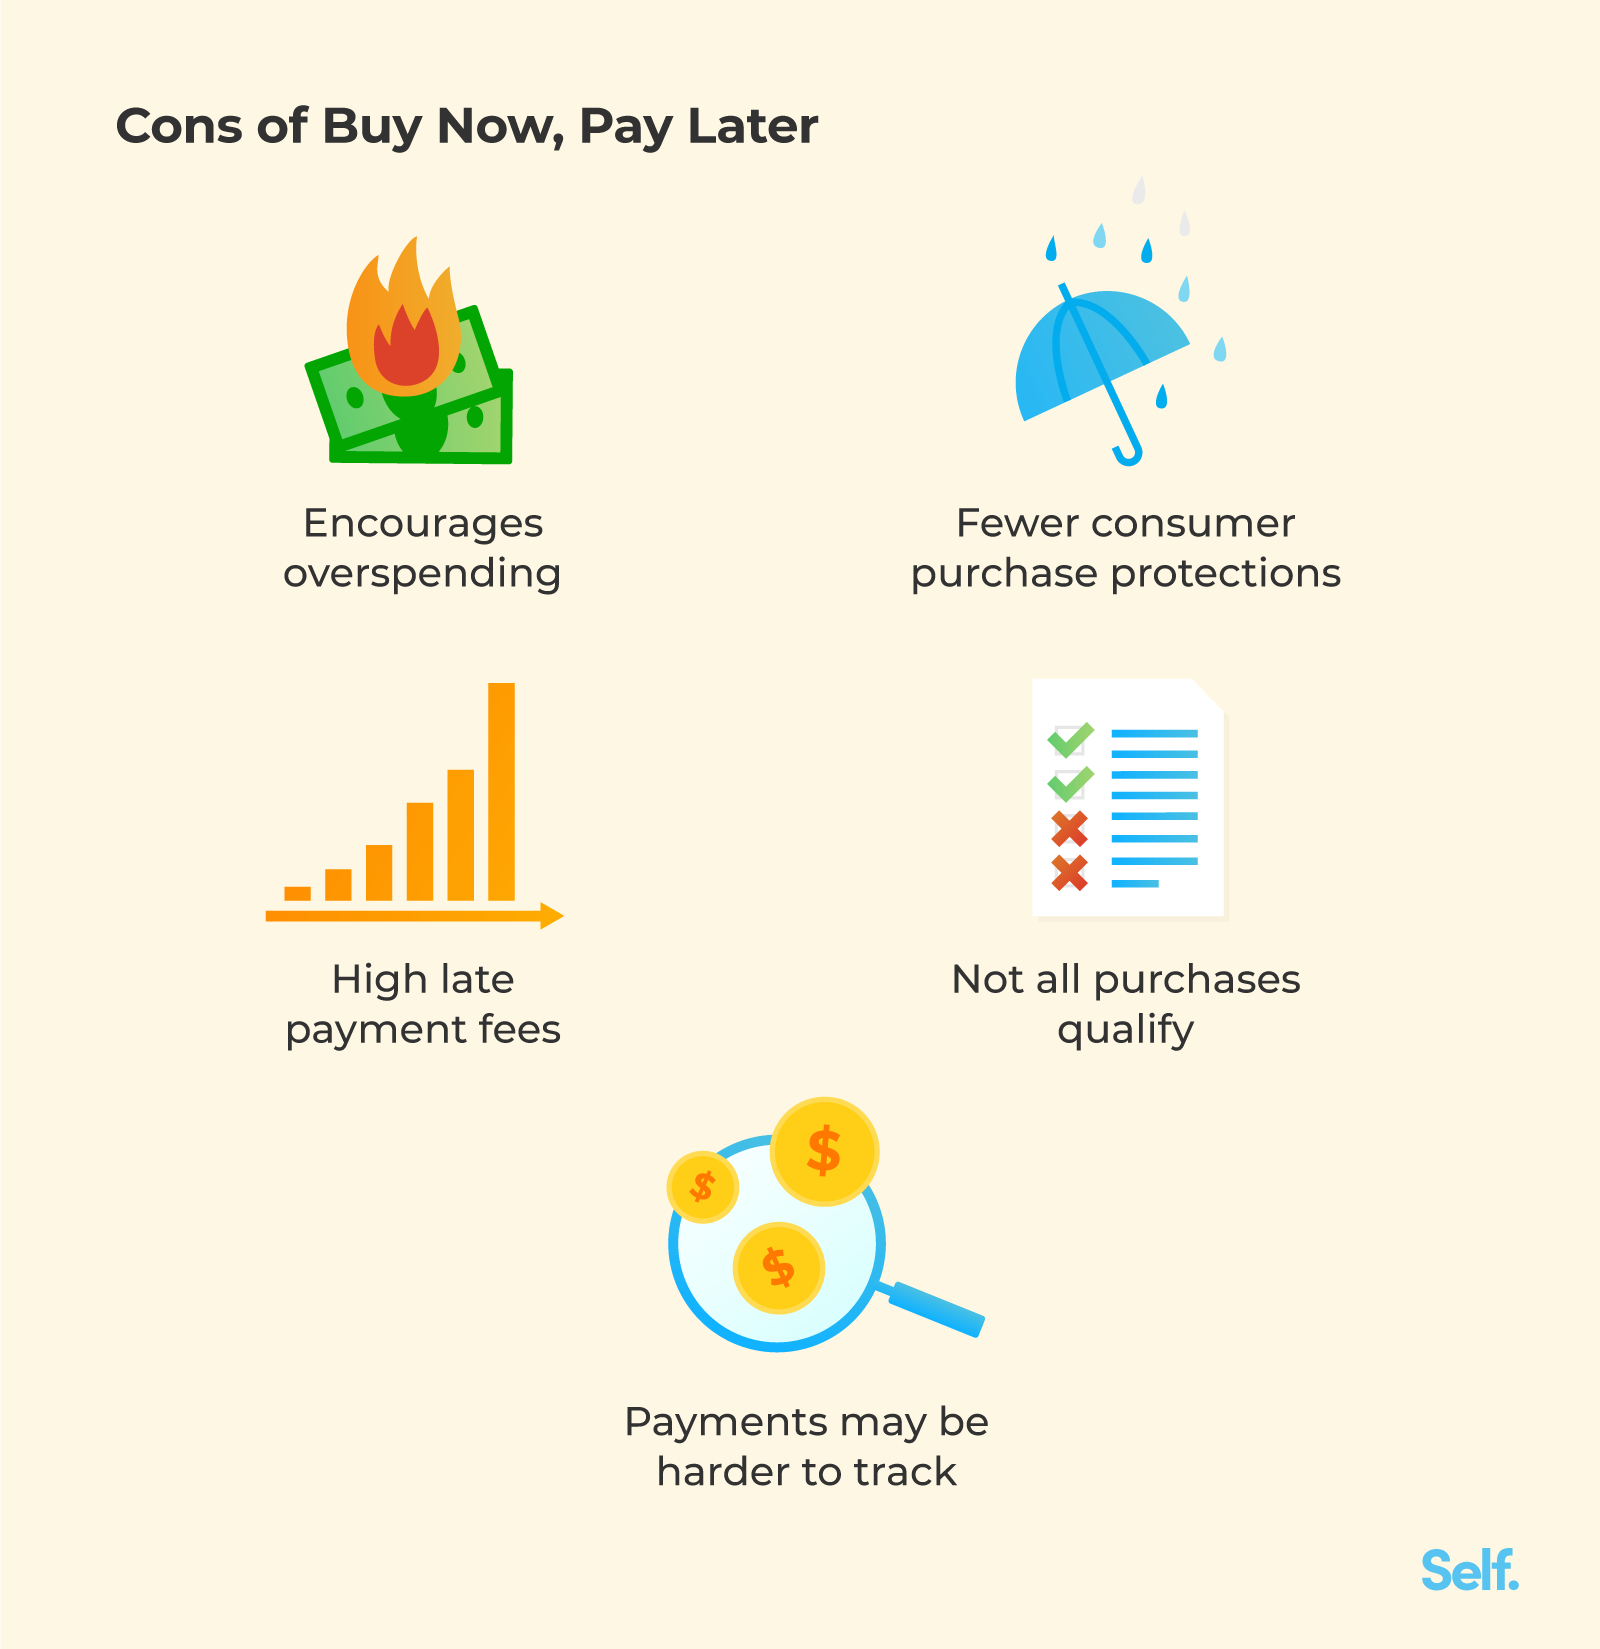 03-Cons-of-Buy-Now-Pay-Later